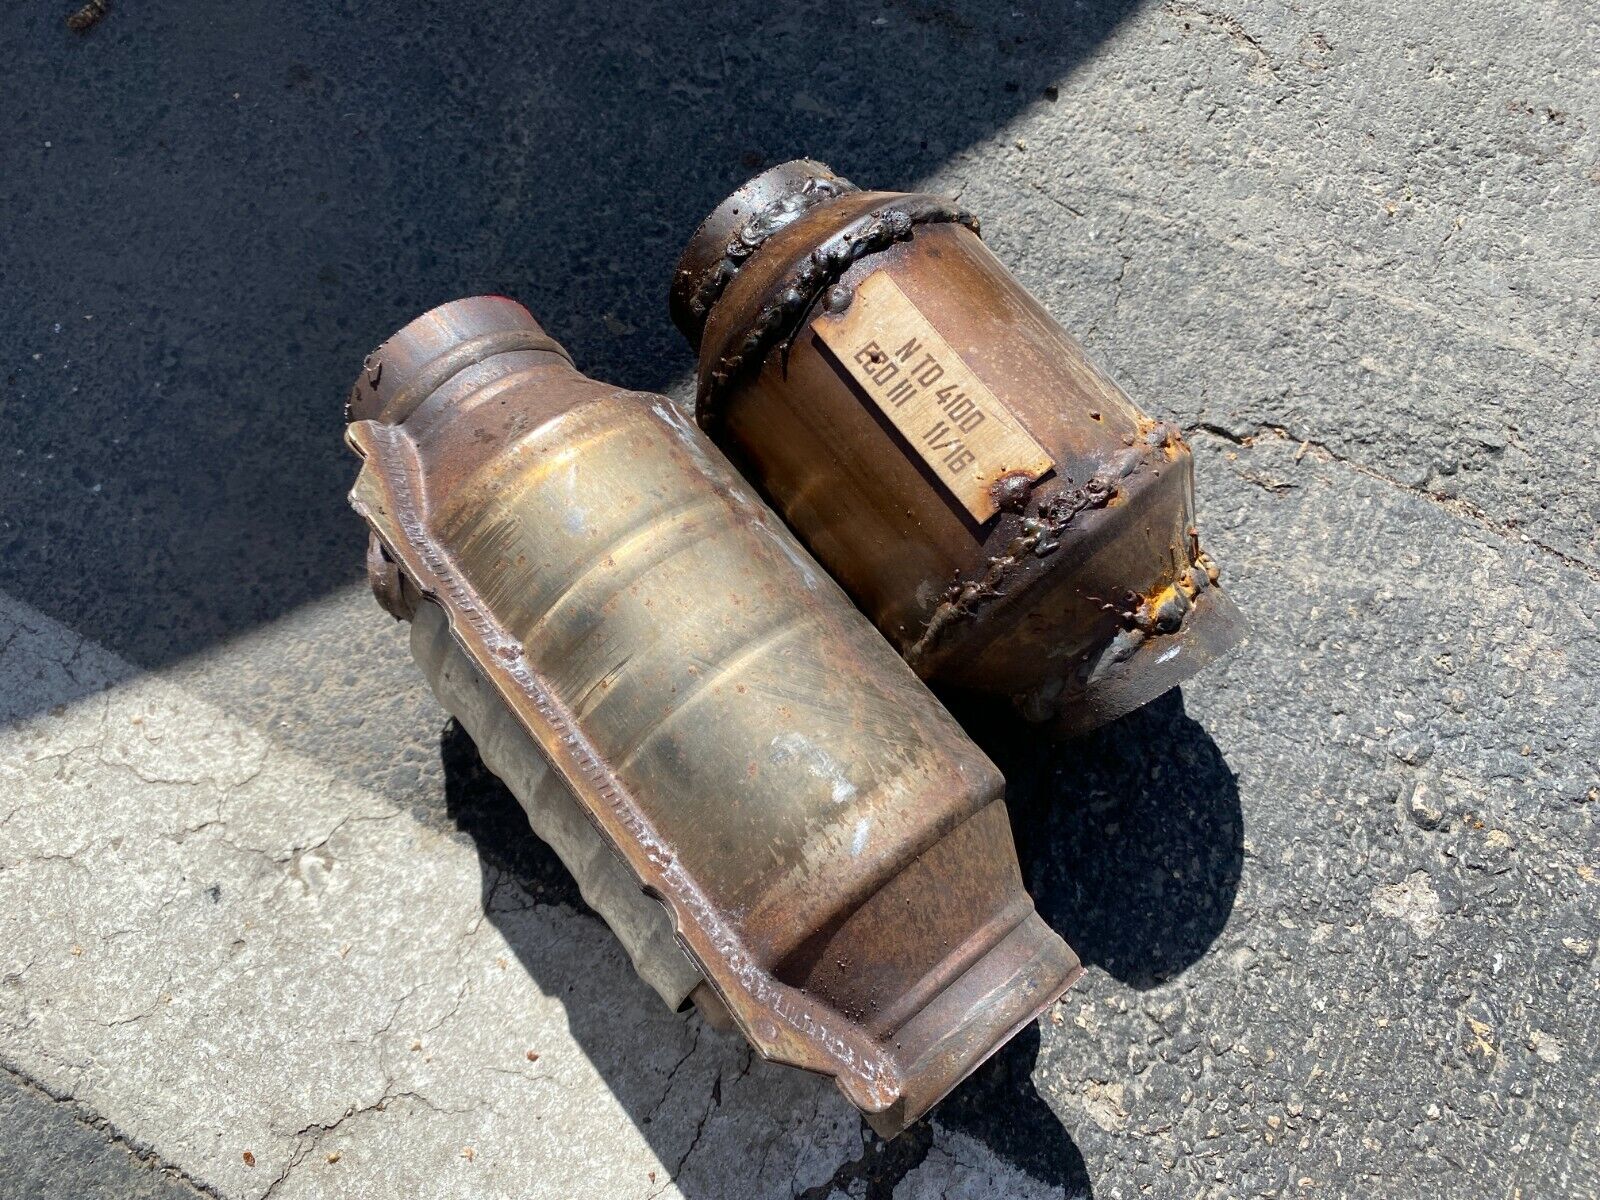 Scrap Catalytic Converters Subaru AFTERMARKET For Recycling Purposes Only